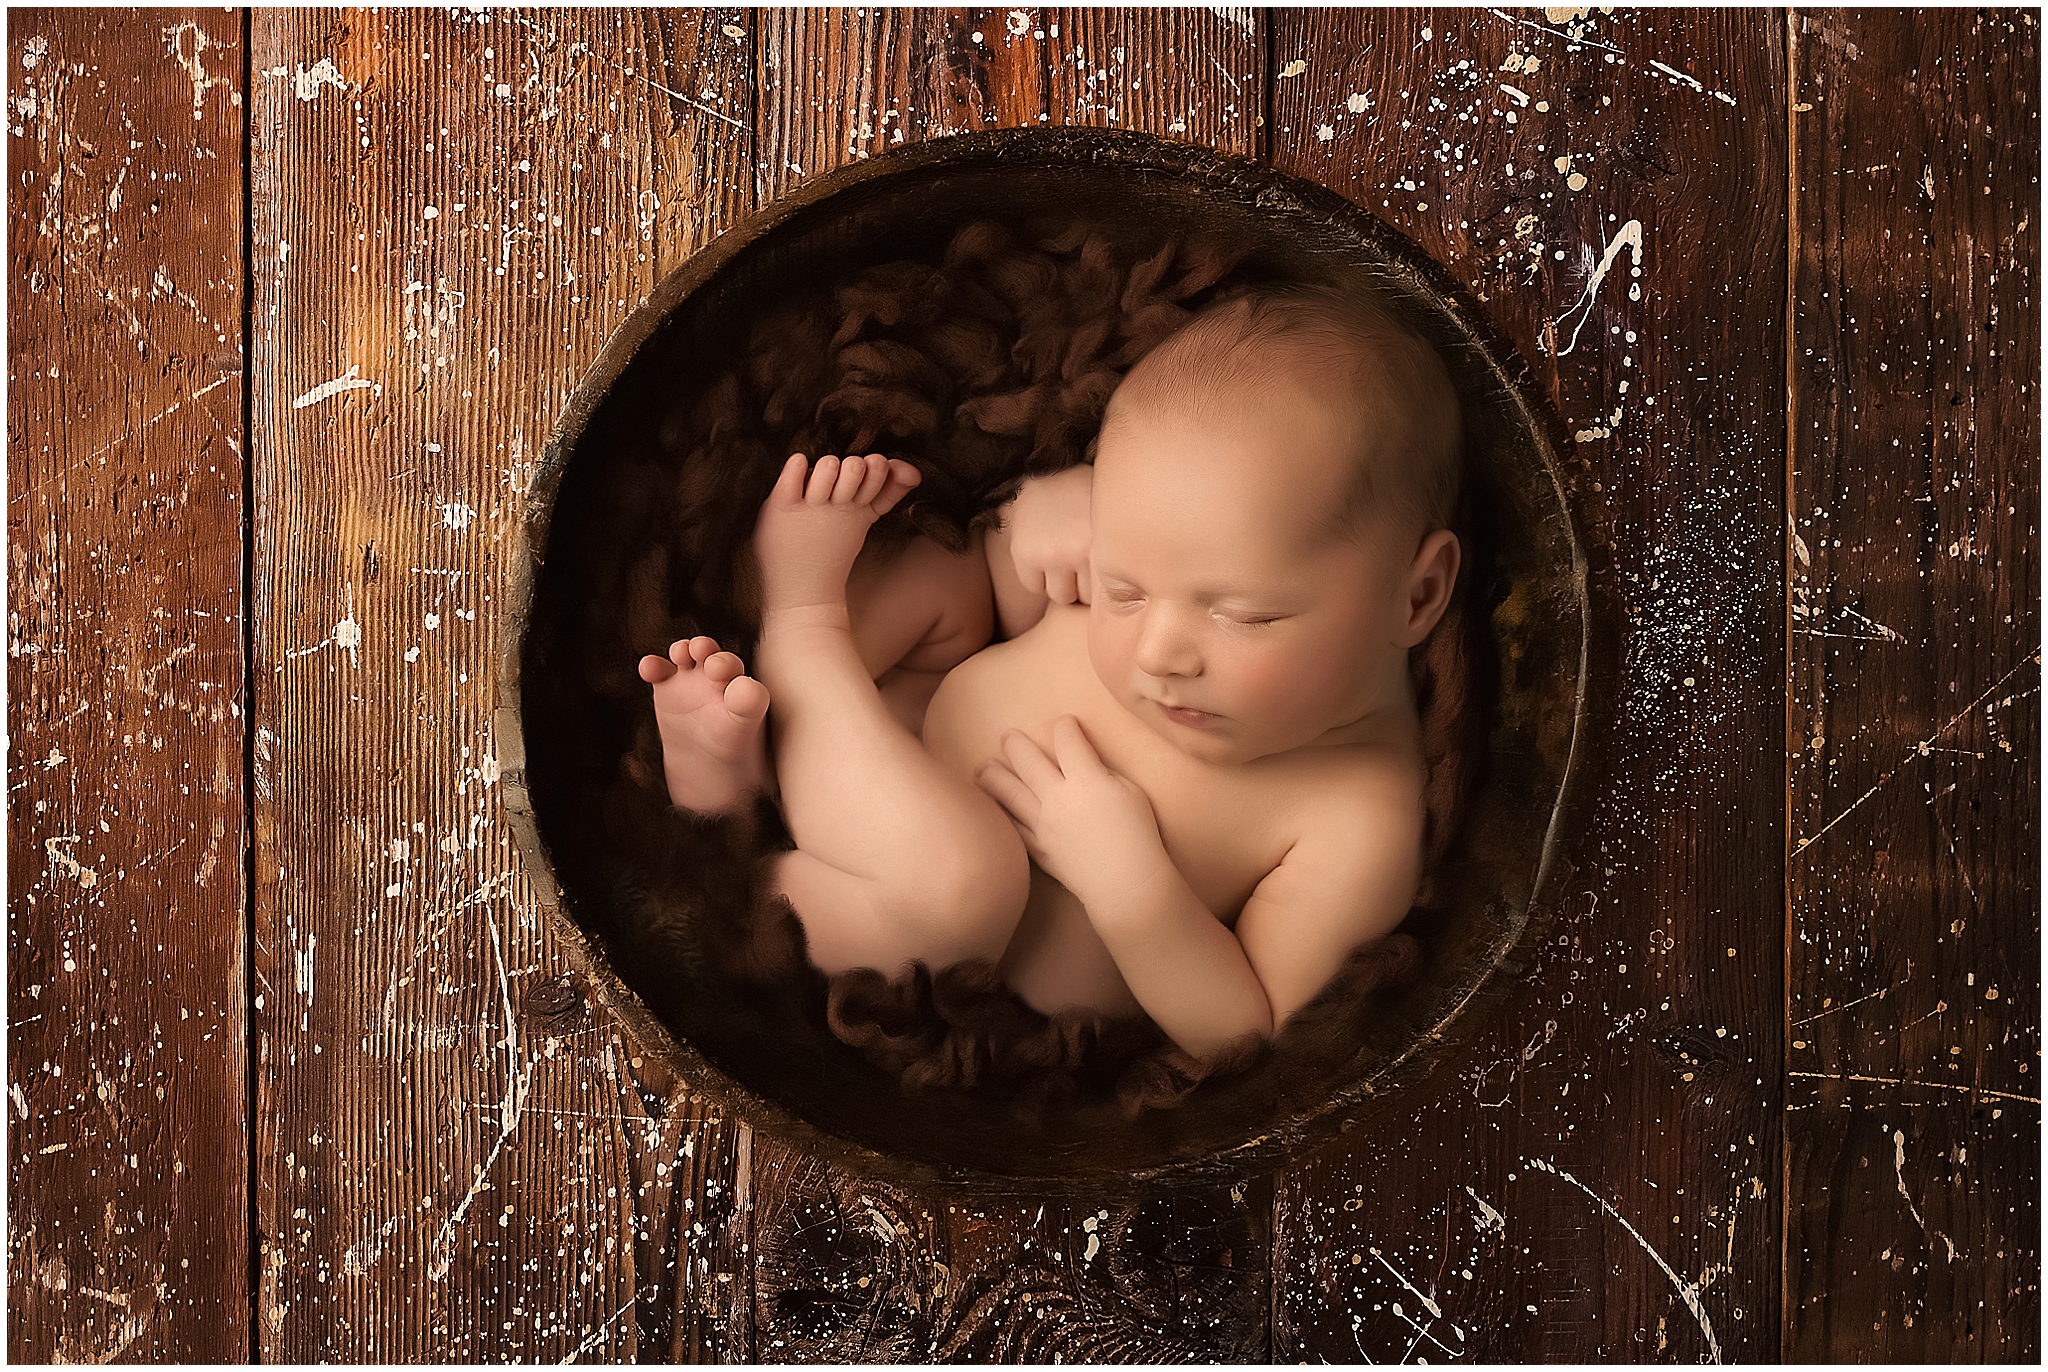 newborn baby in bowl at photography studio in london ontario